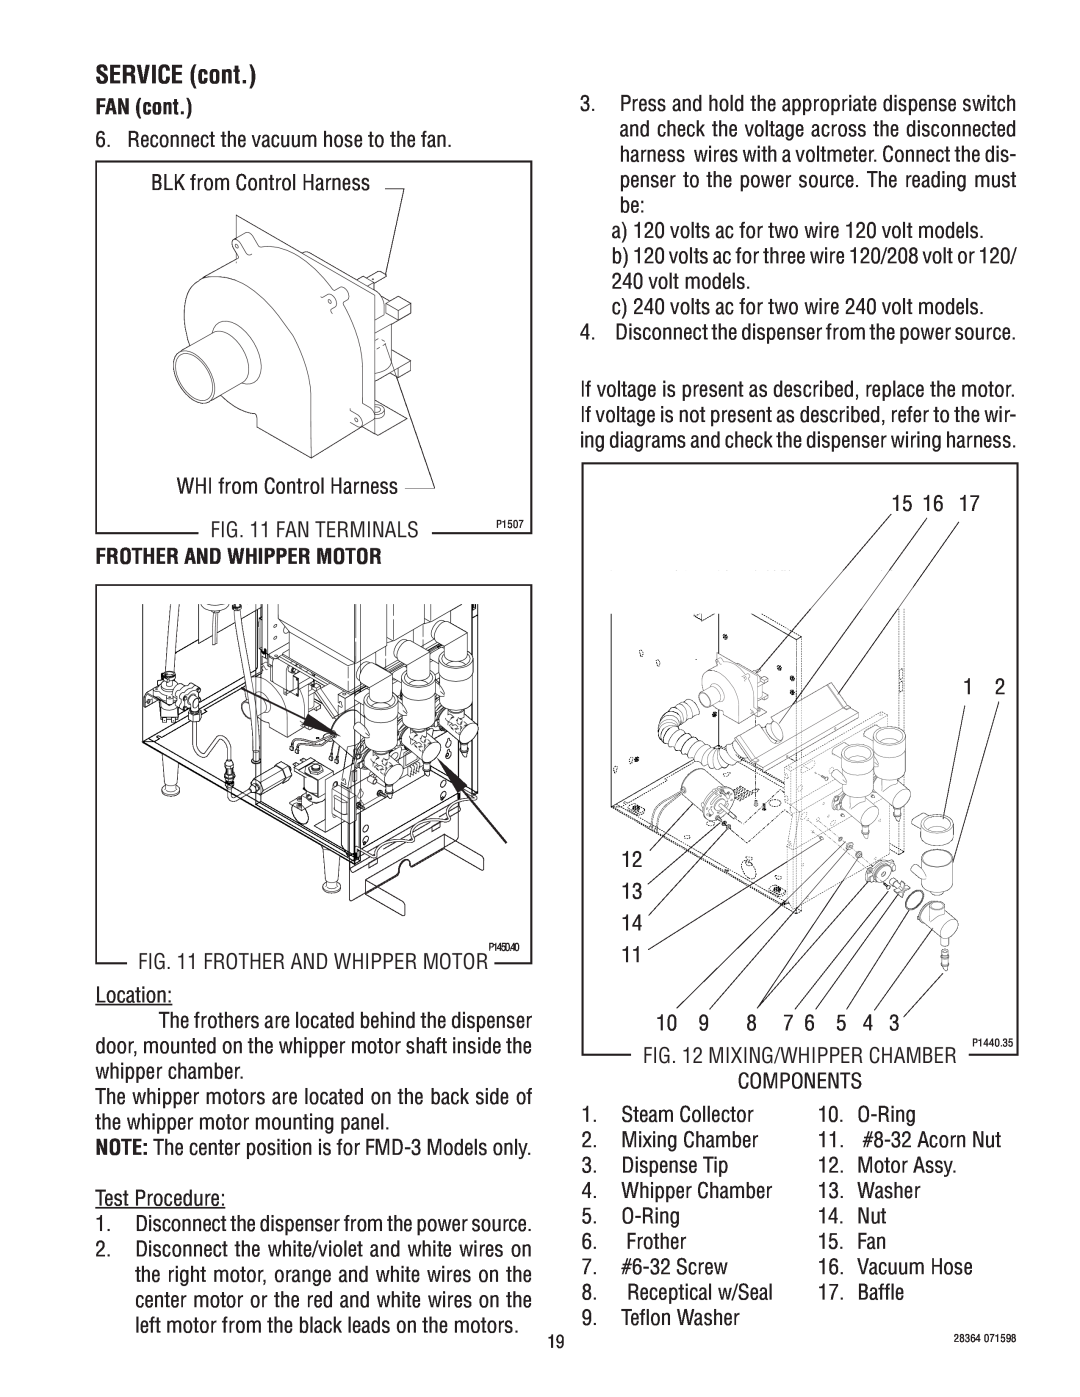 Bunn FMD-3 service manual FAN cont, Frother And Whipper Motor, SERVICE cont 